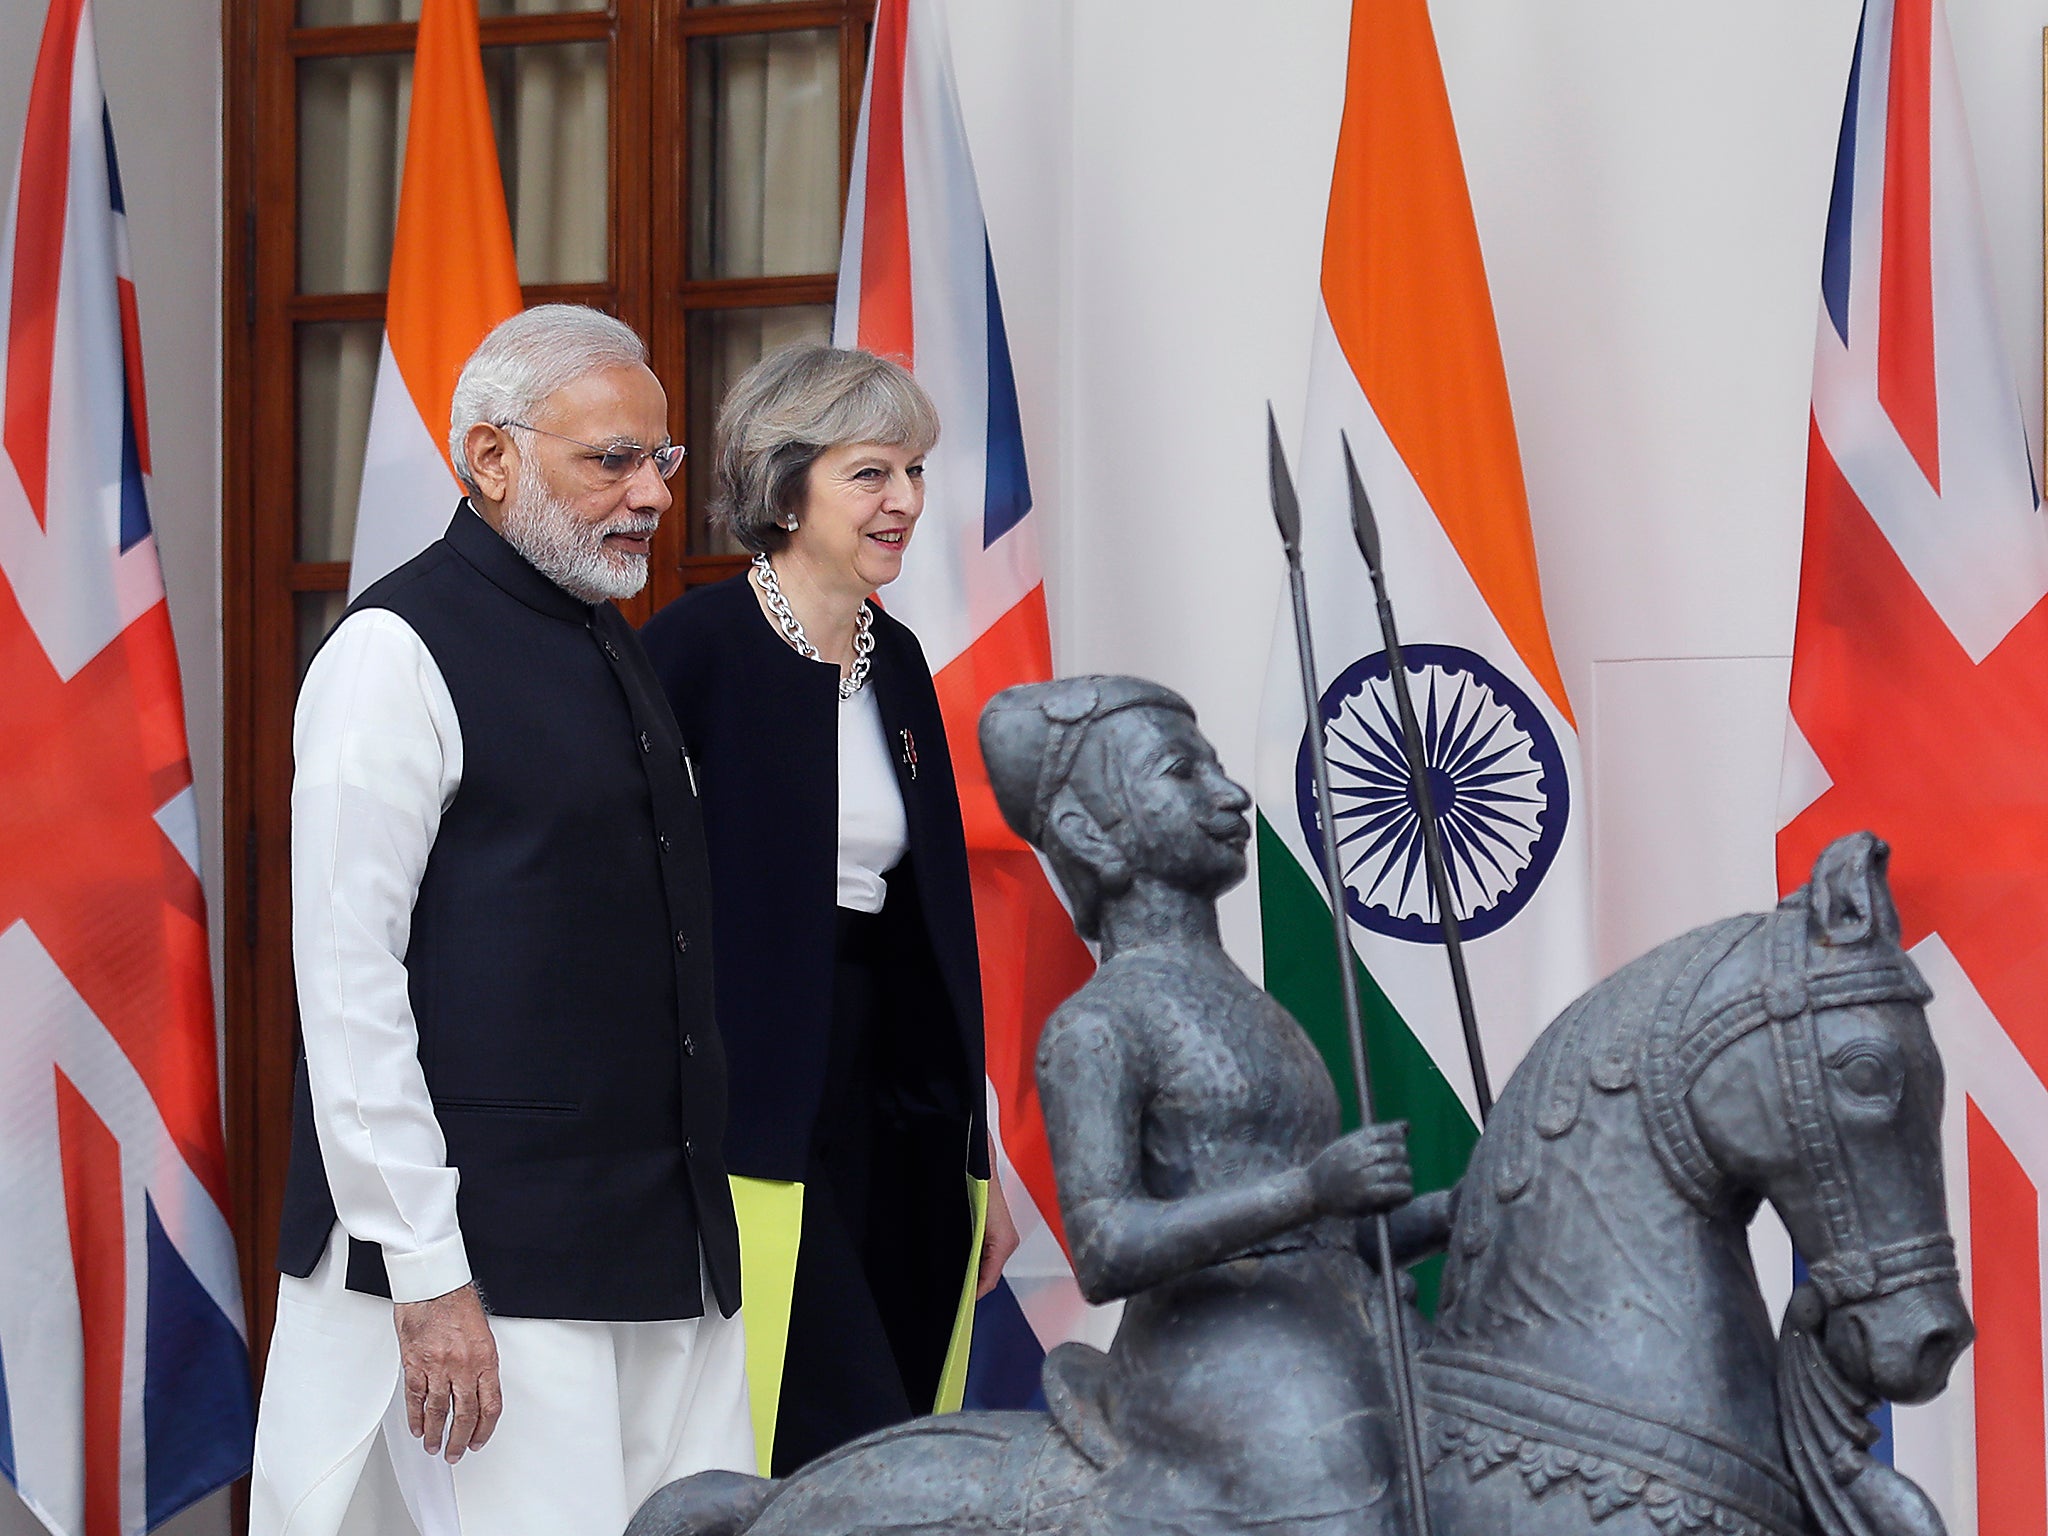 India’s GDP per person is still one fifth, or 20 per cent, of that in the UK